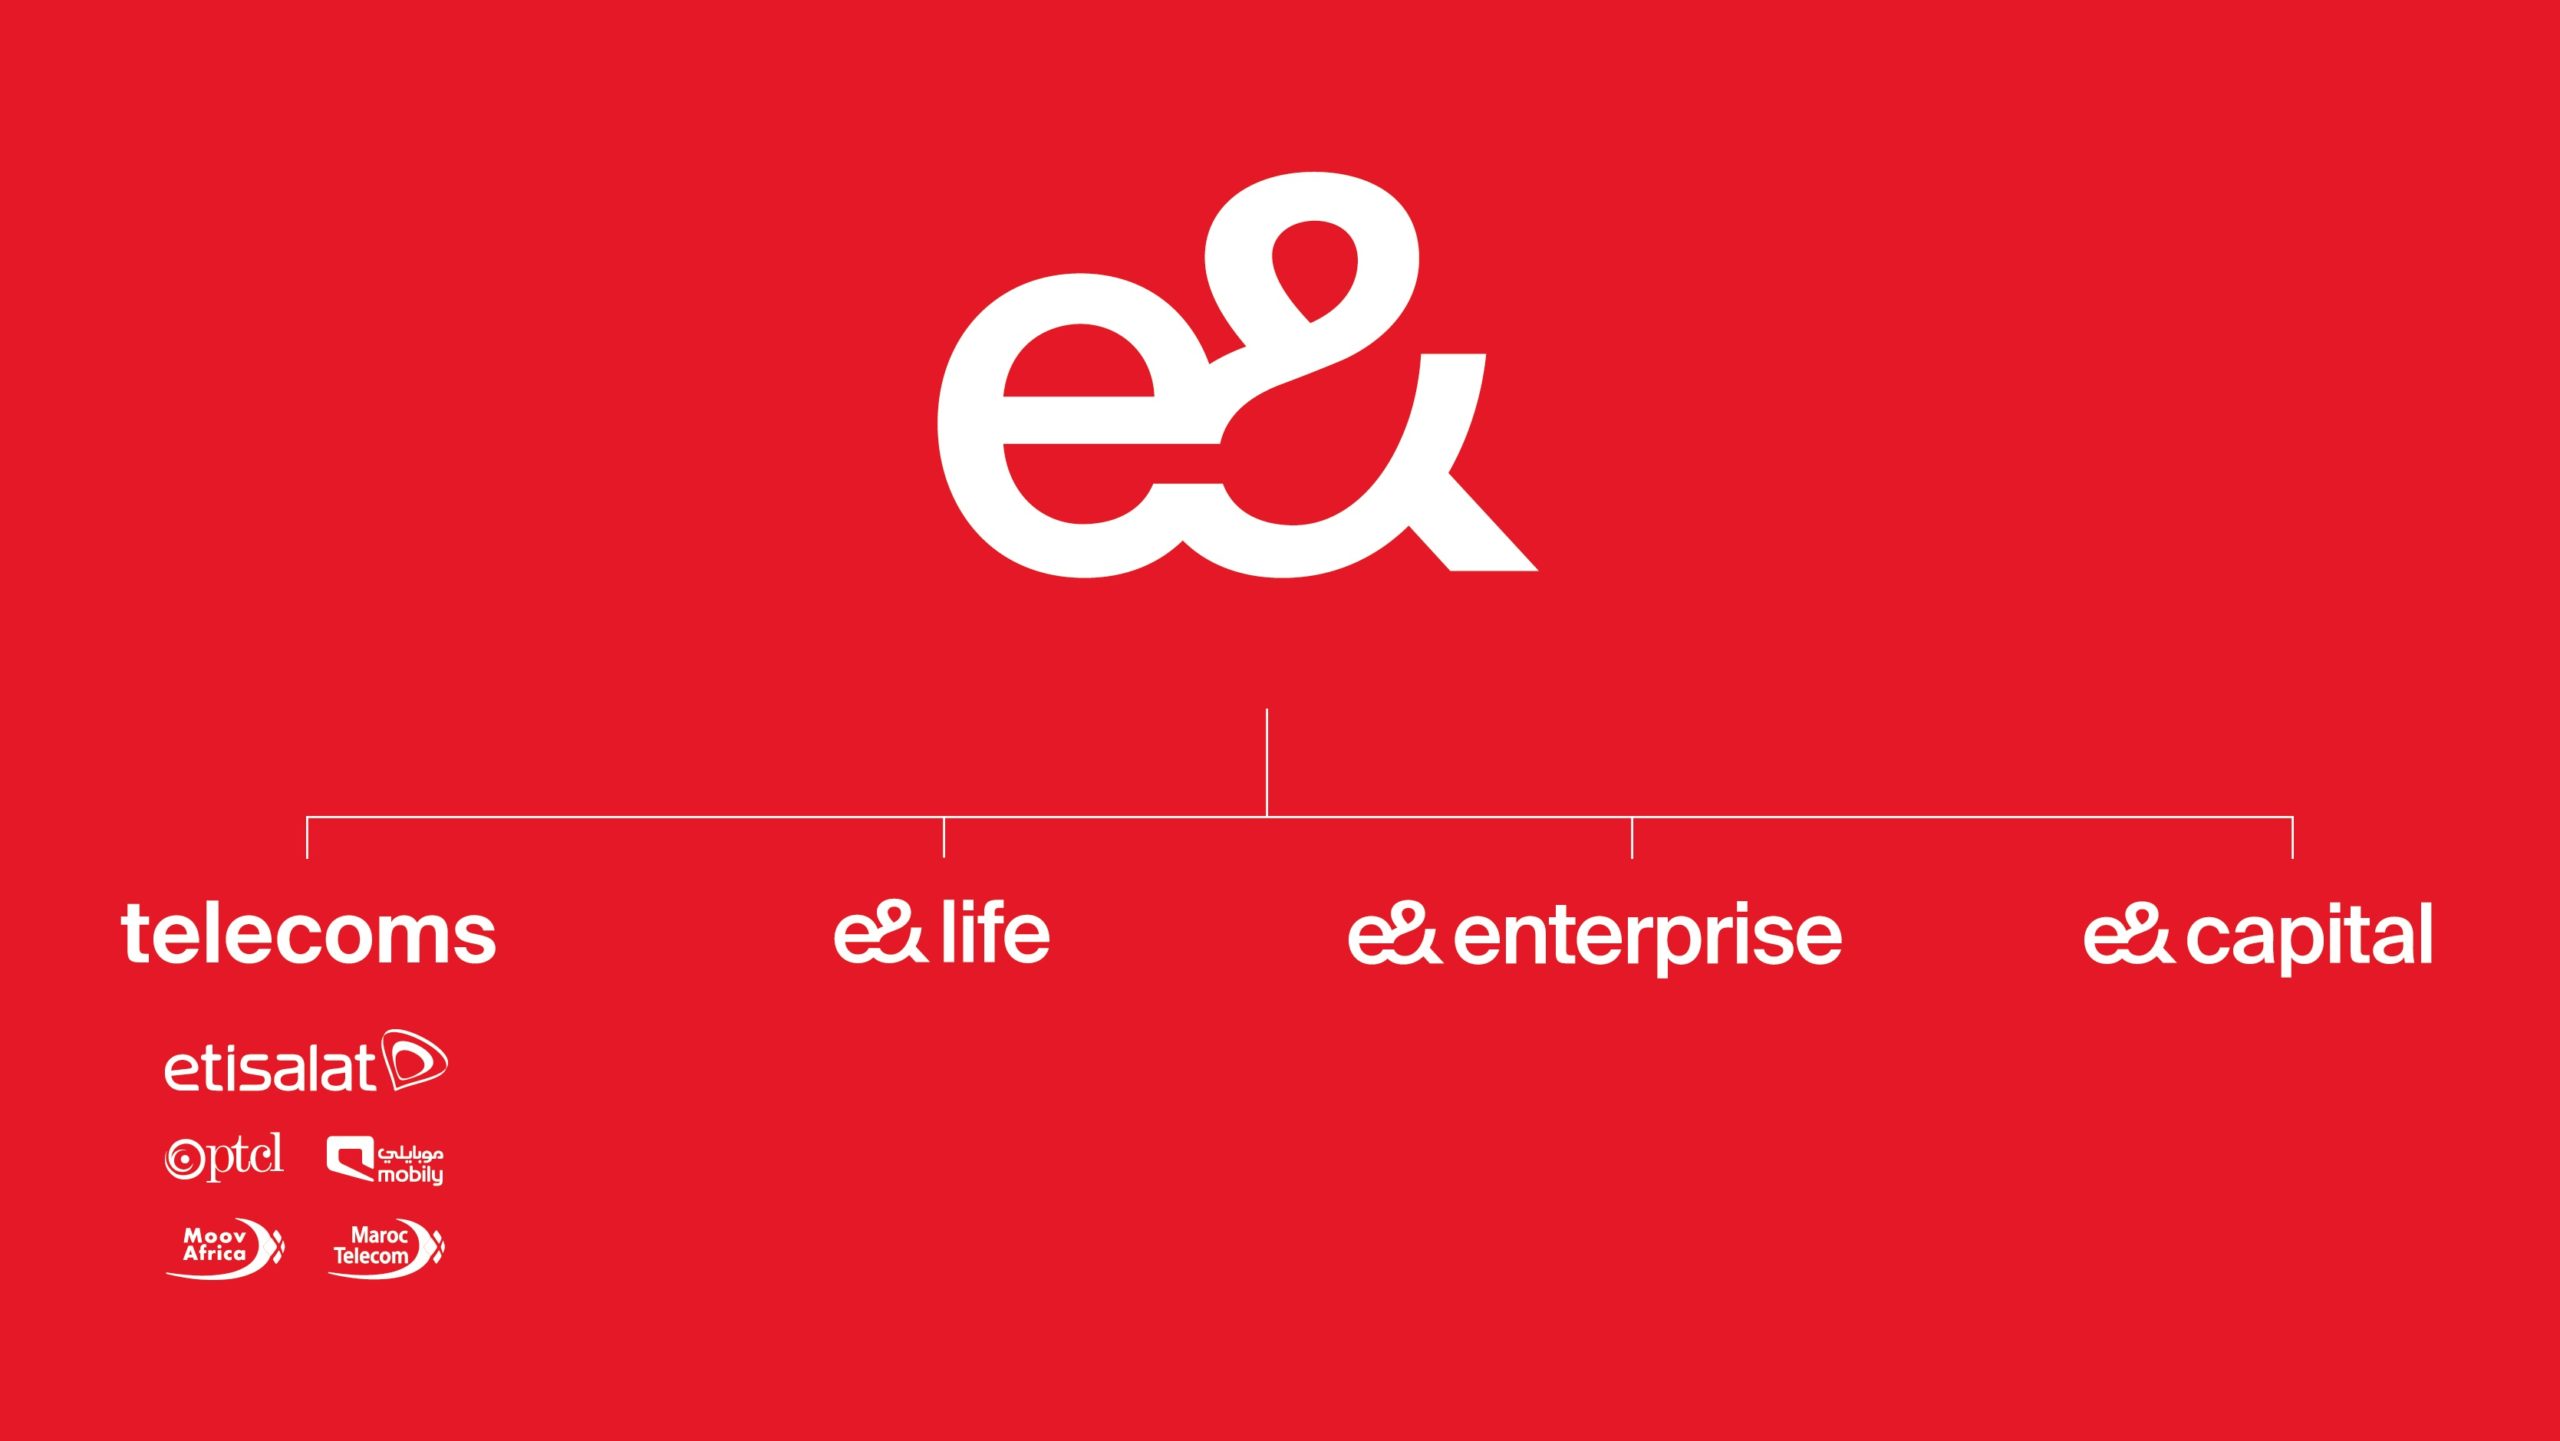 e& is the new brand identity of Etisalat Group